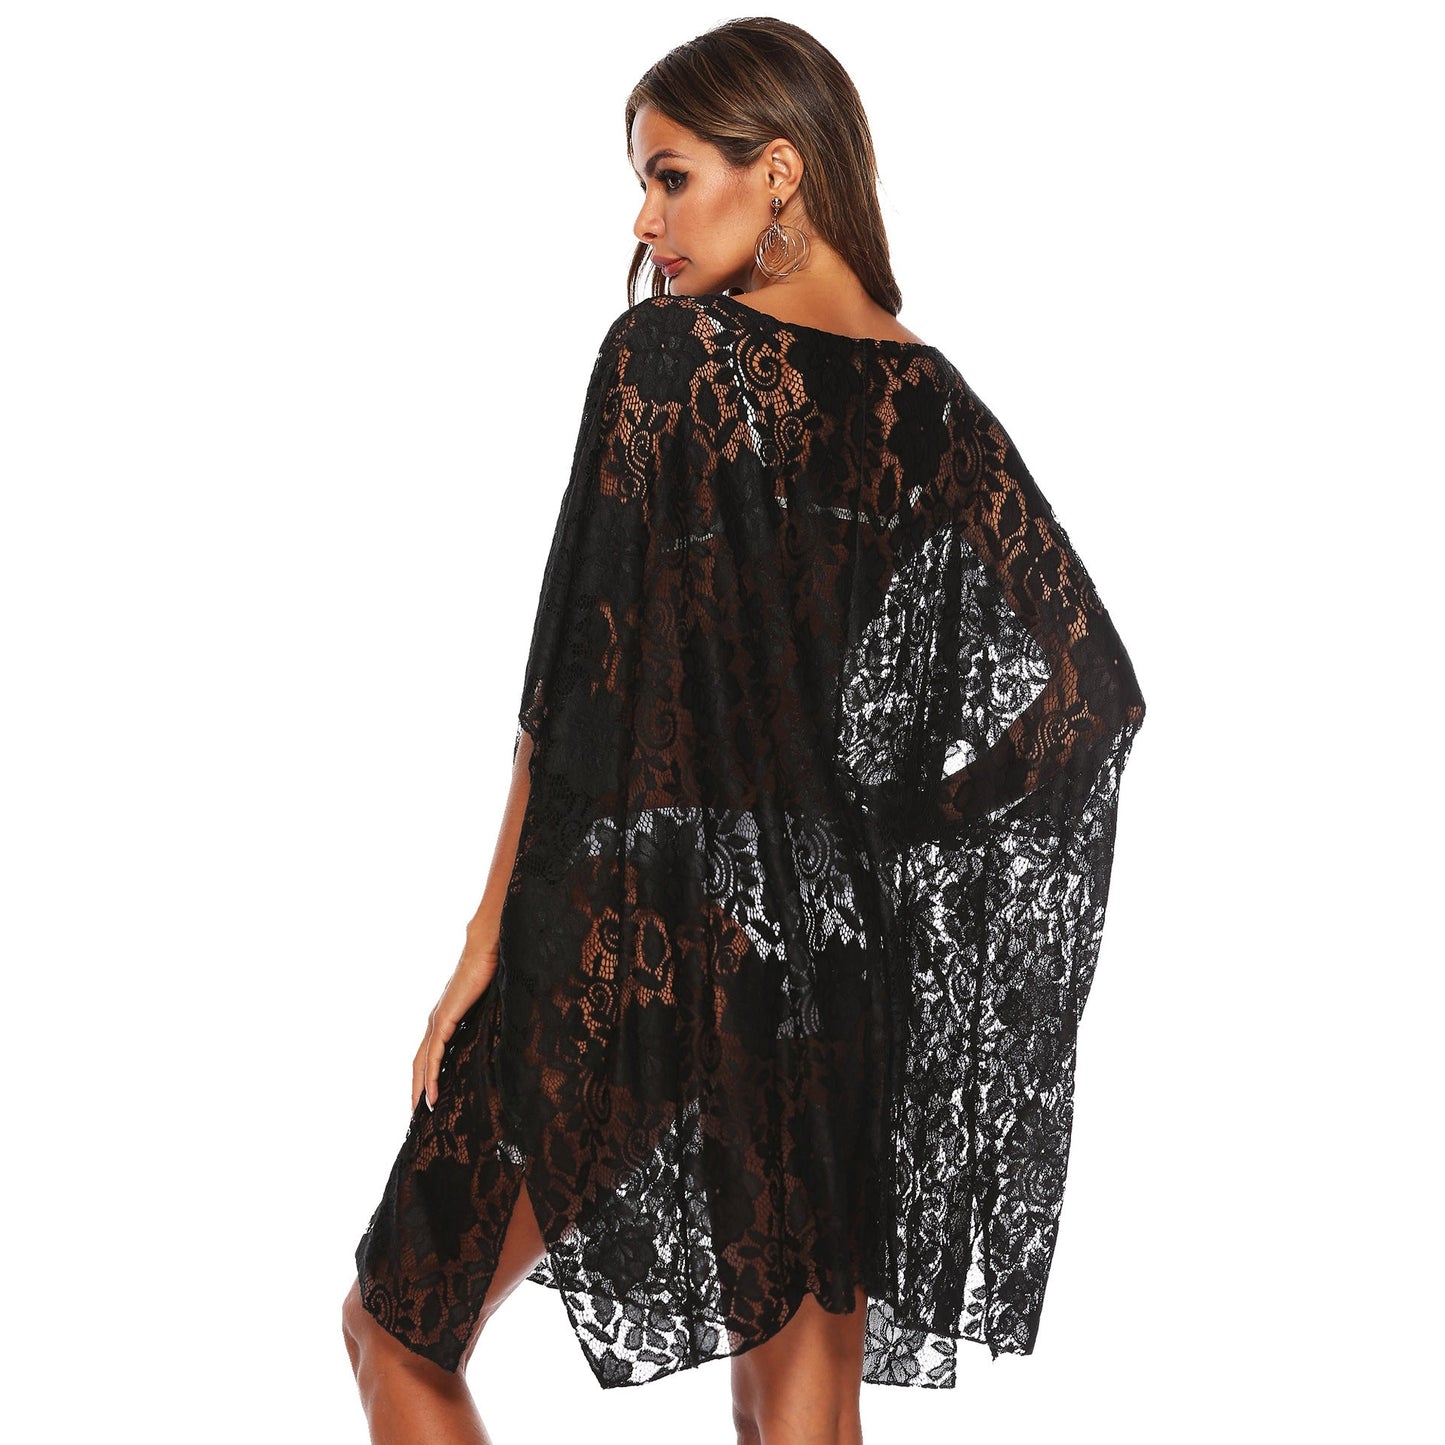 Black Lace See Through Summer Beach Cover Ups-Swimwear-Black-One Size-Free Shipping at meselling99